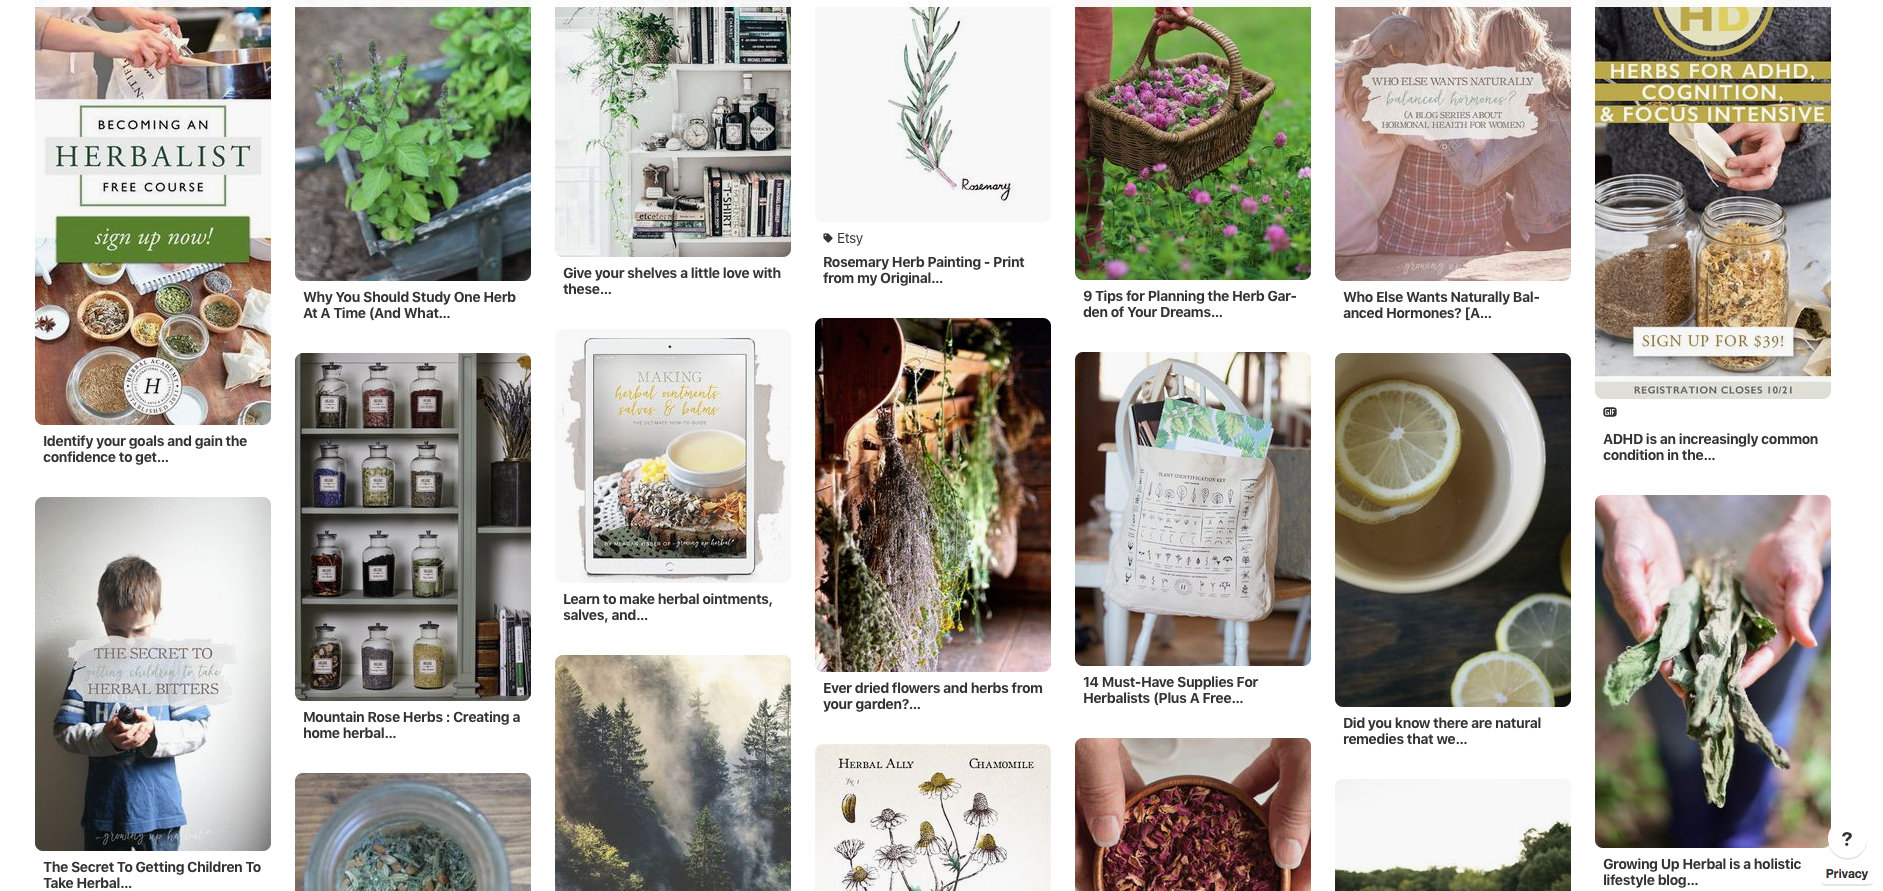 6 Herbal Vision Boards To Inspire Your Herbal Journey | Herbal Academy | If you're struggling to find who you are as an herbalist, here are six herbal vision boards to inspire you in finding your herbal identity and future goals.